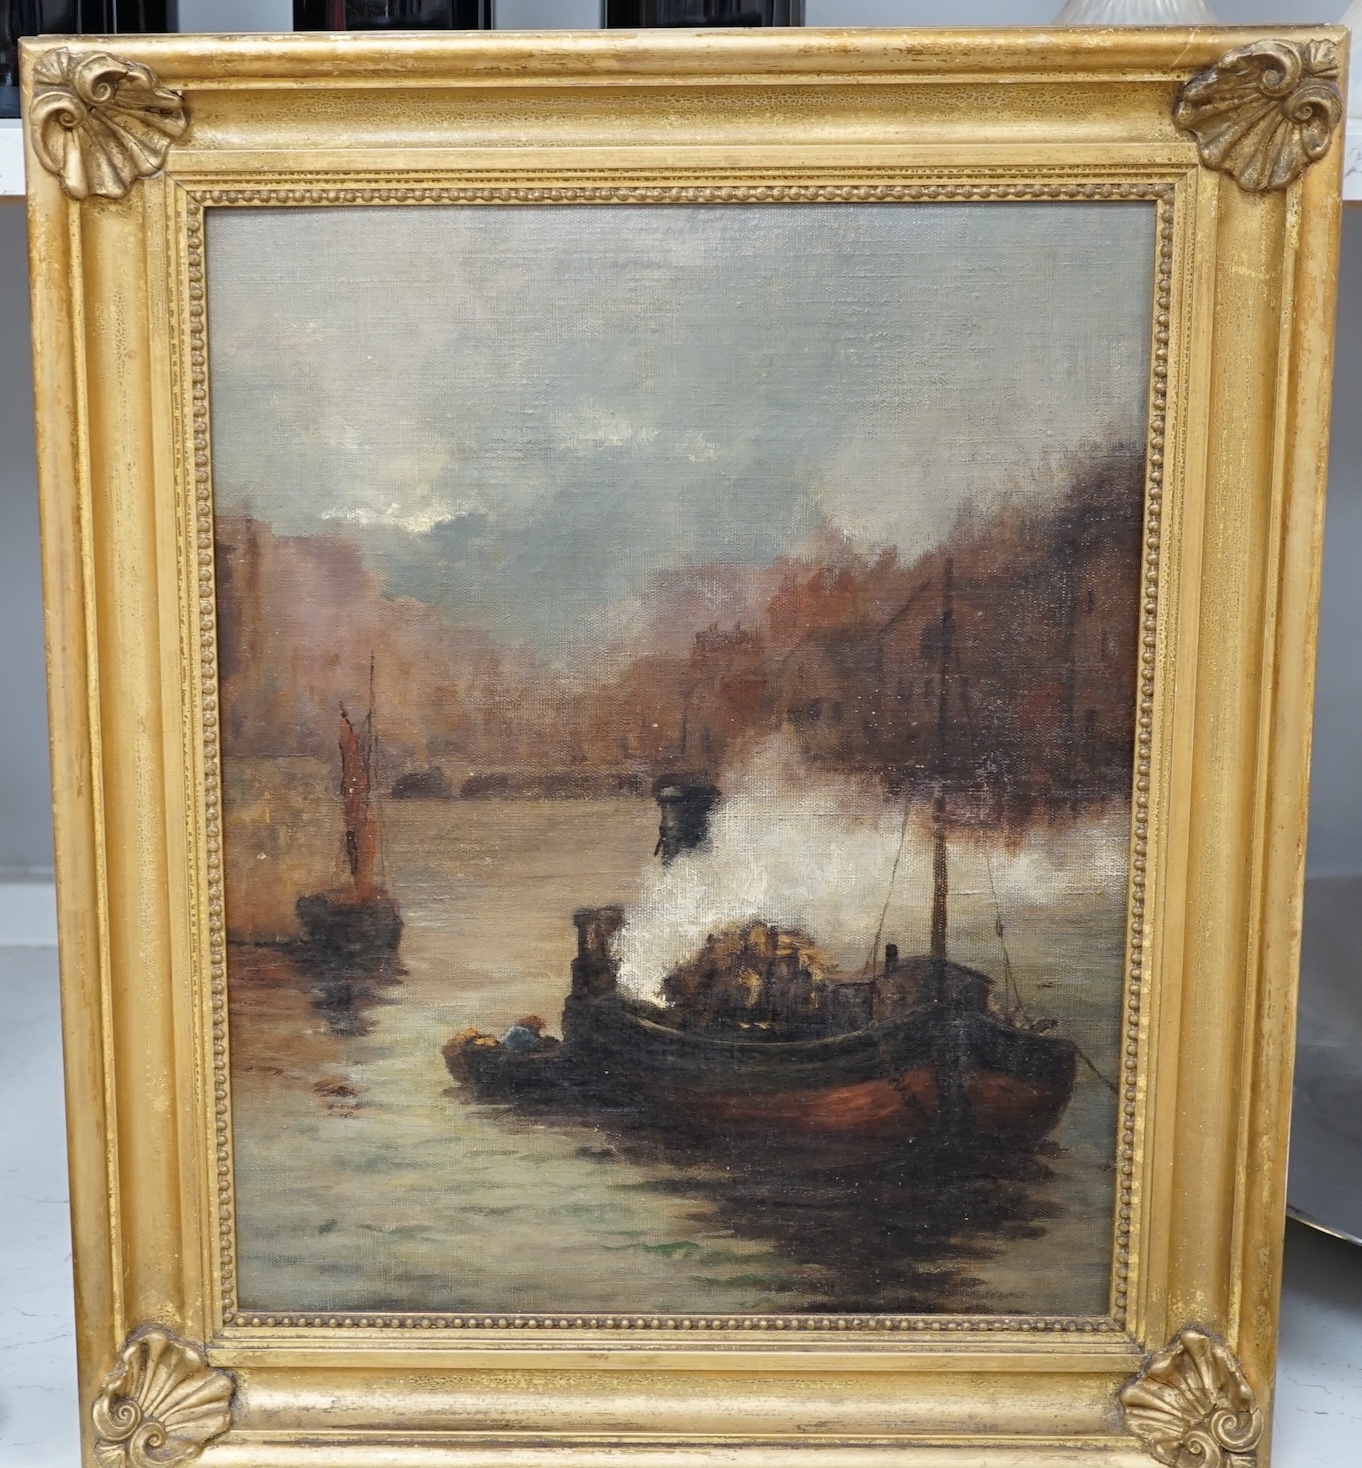 19th century, oil on canvas, Dredger at work, Whitby, partial inscribed artist label verso, unsigned, 39 x 31cm, gilt framed. Condition - fair to good